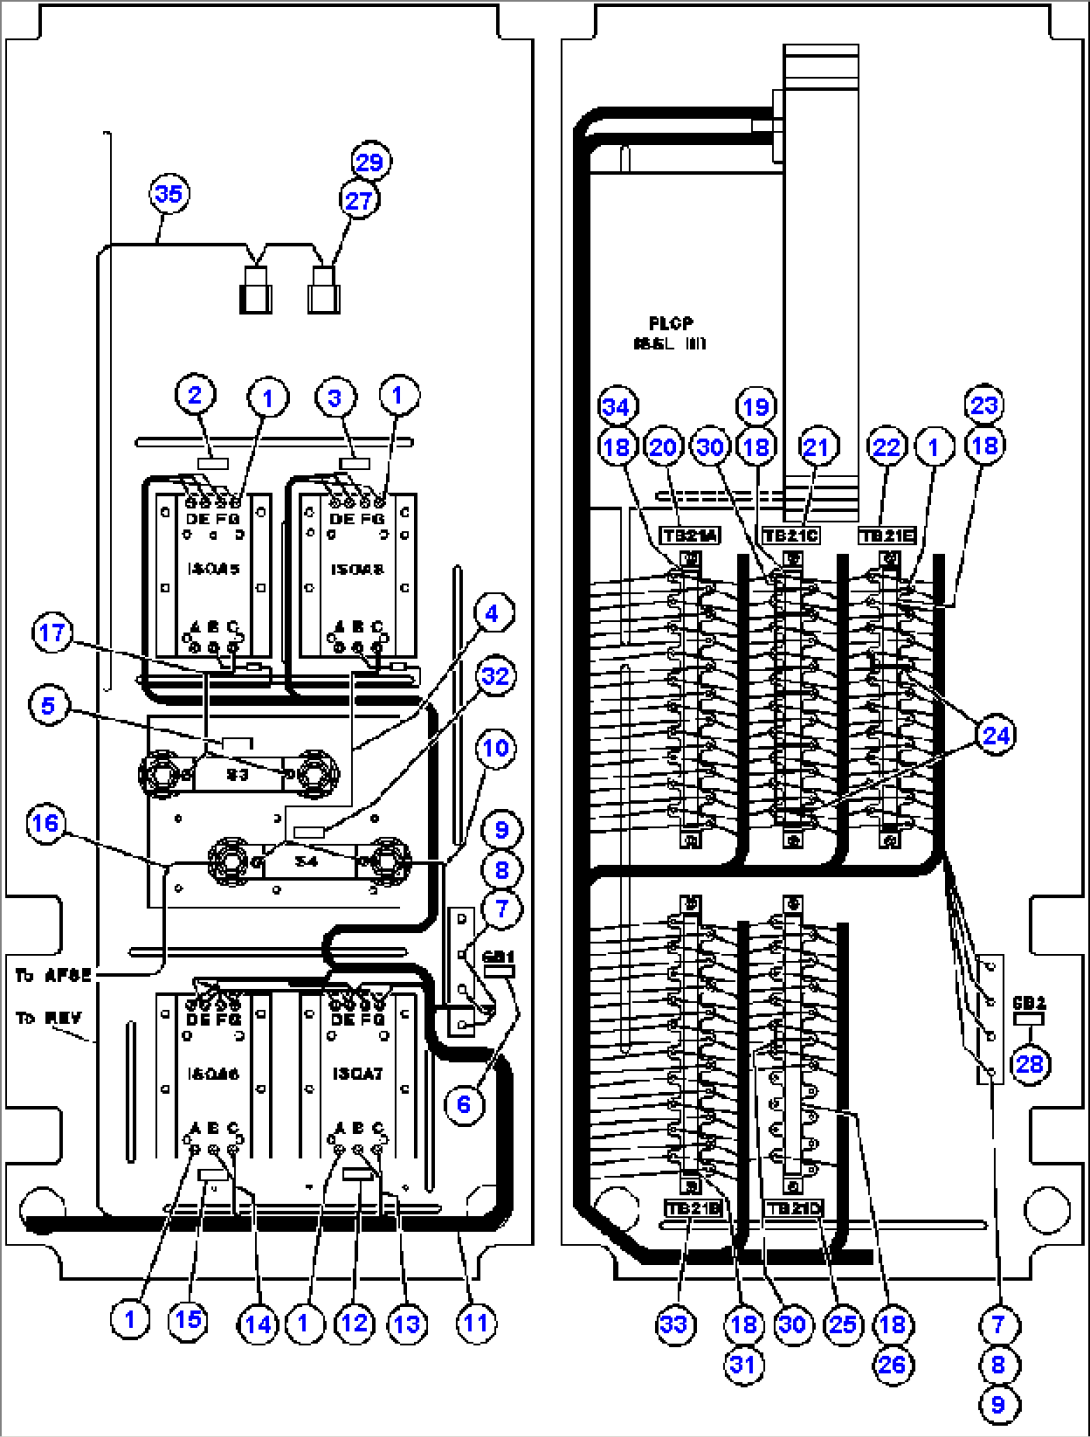 CONTROL CABINET WIRING - 5